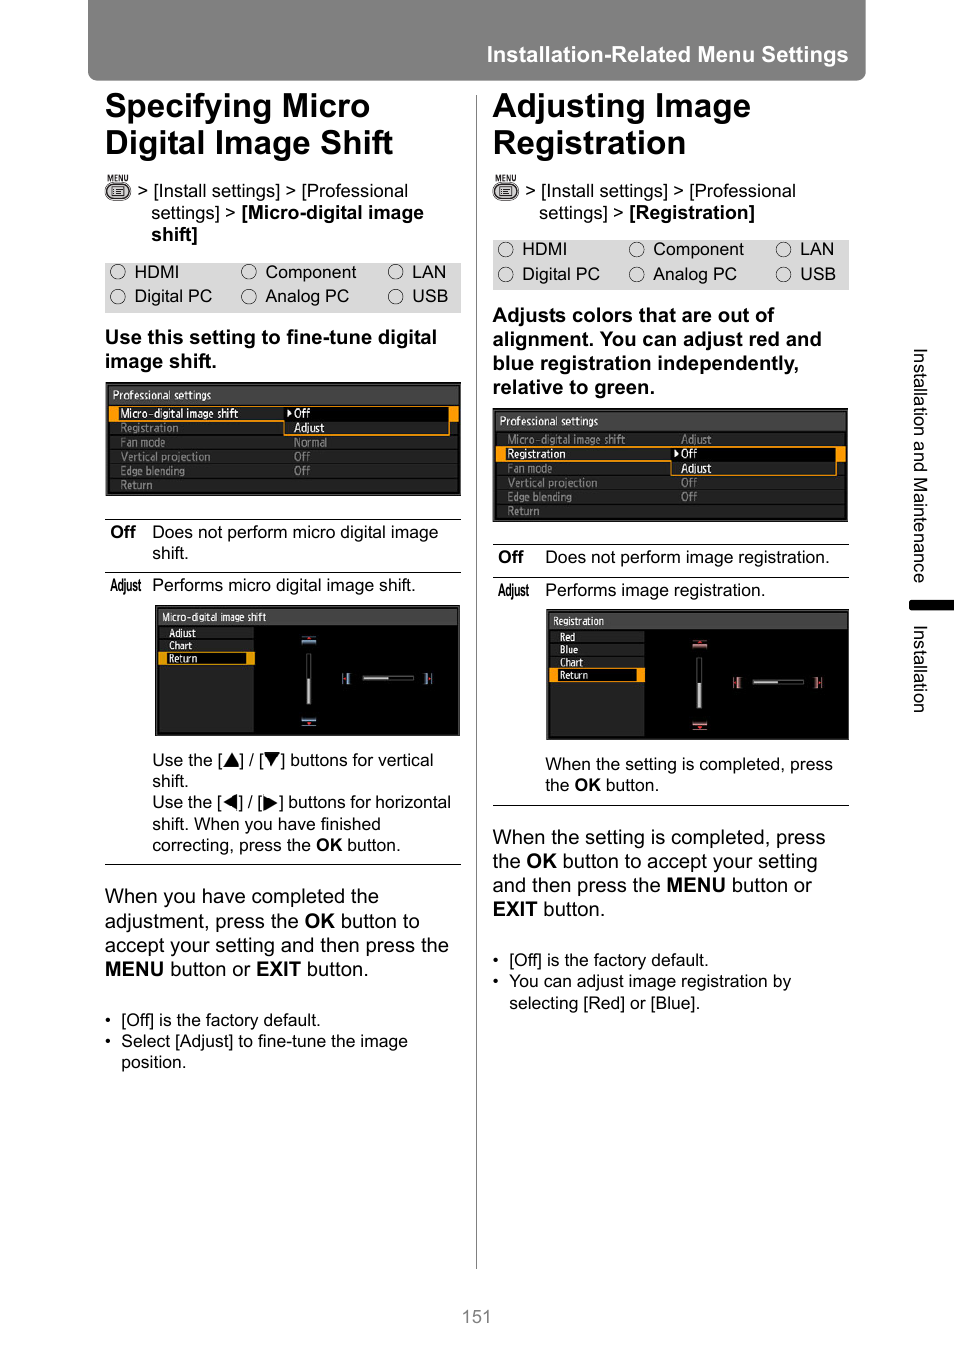 Specifying micro digital image shift, Adjusting image registration | Canon XEED WUX450 User Manual | Page 151 / 314